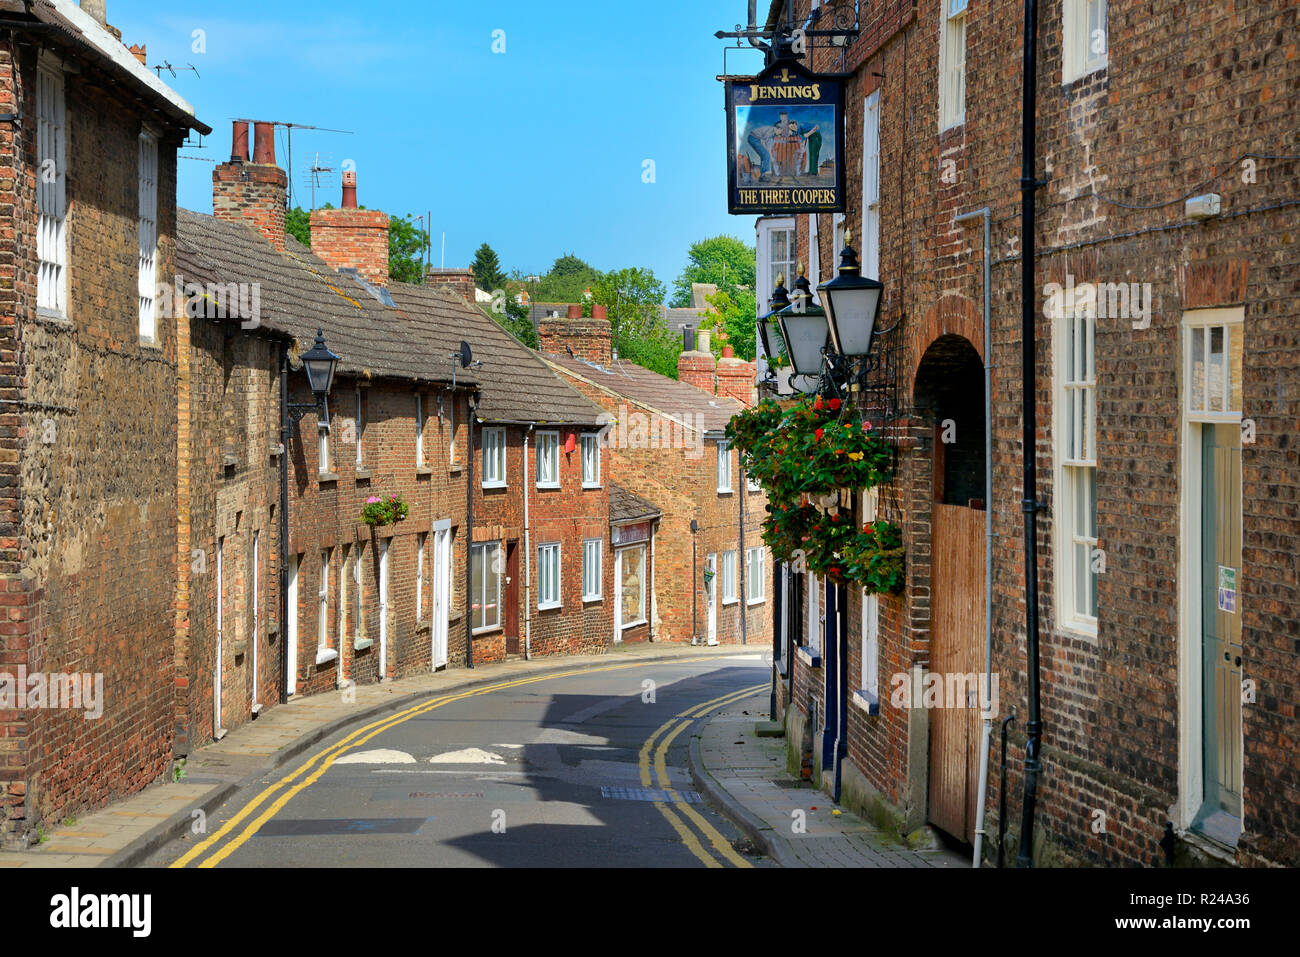 Old houses, Emgate, in the thirteenth century market town of Bedale, Hambleton, North Yorkshire, England, United Kingdom, Europe Stock Photo